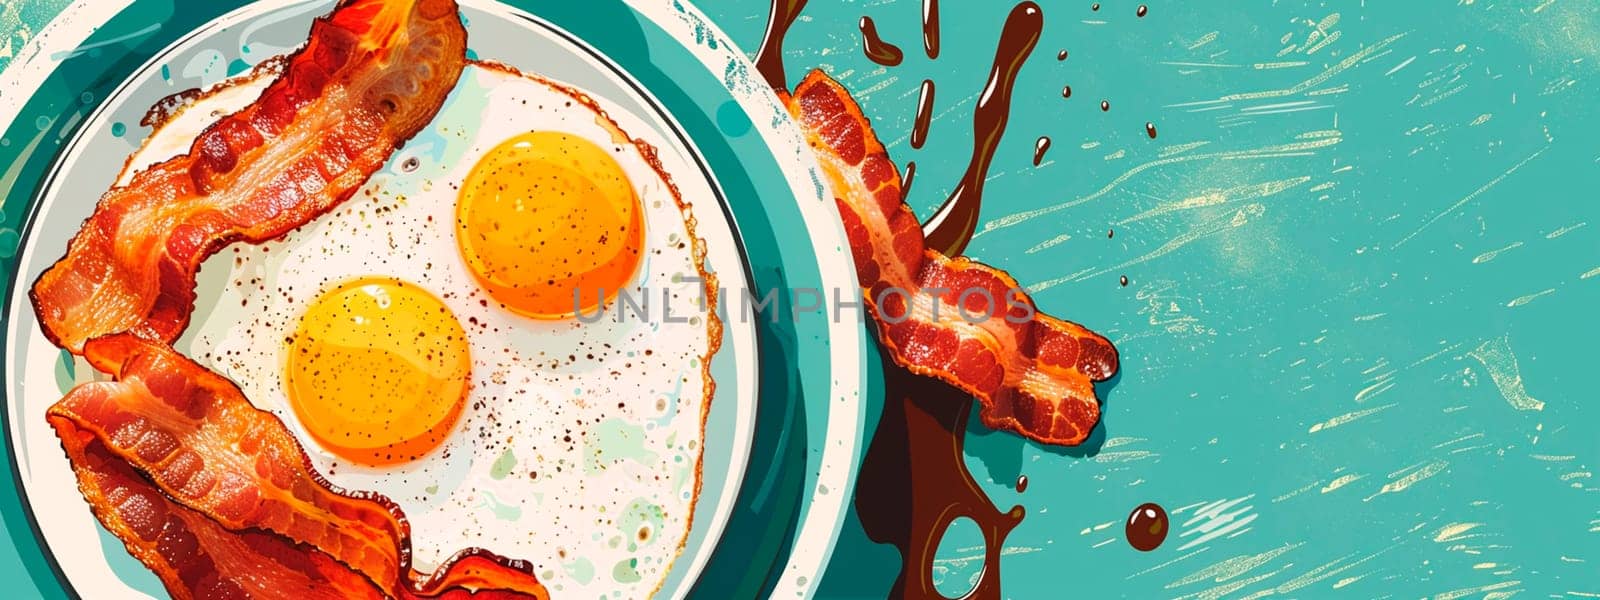 eggs and bacon on a plate. Selective focus. by yanadjana